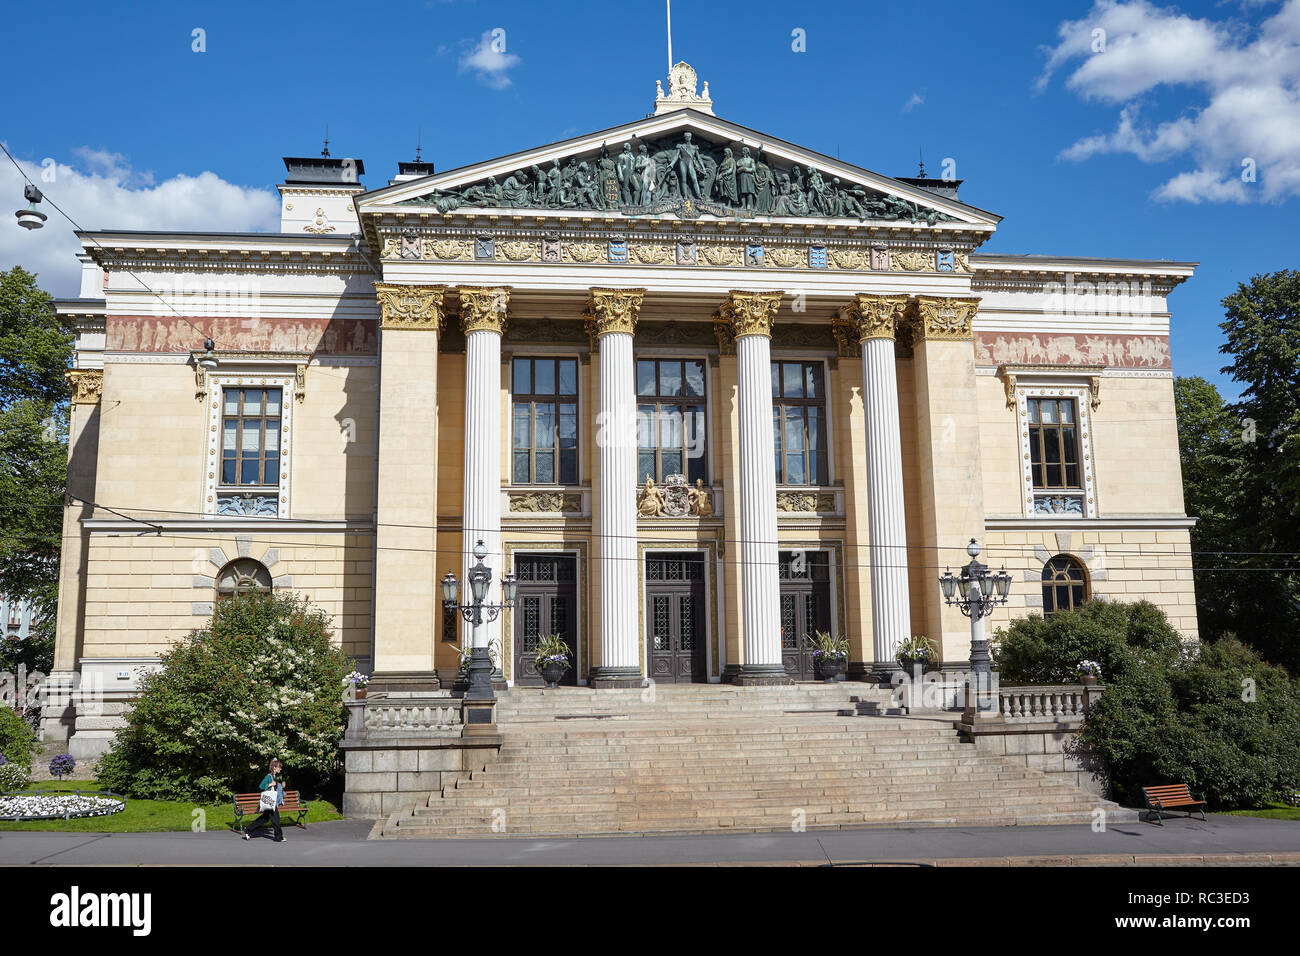 Helsinki, Finland - July 15, 2017: People at House of the Estates in a summer day. From 1891, when it was built, it housed the three commoner estates  Stock Photo